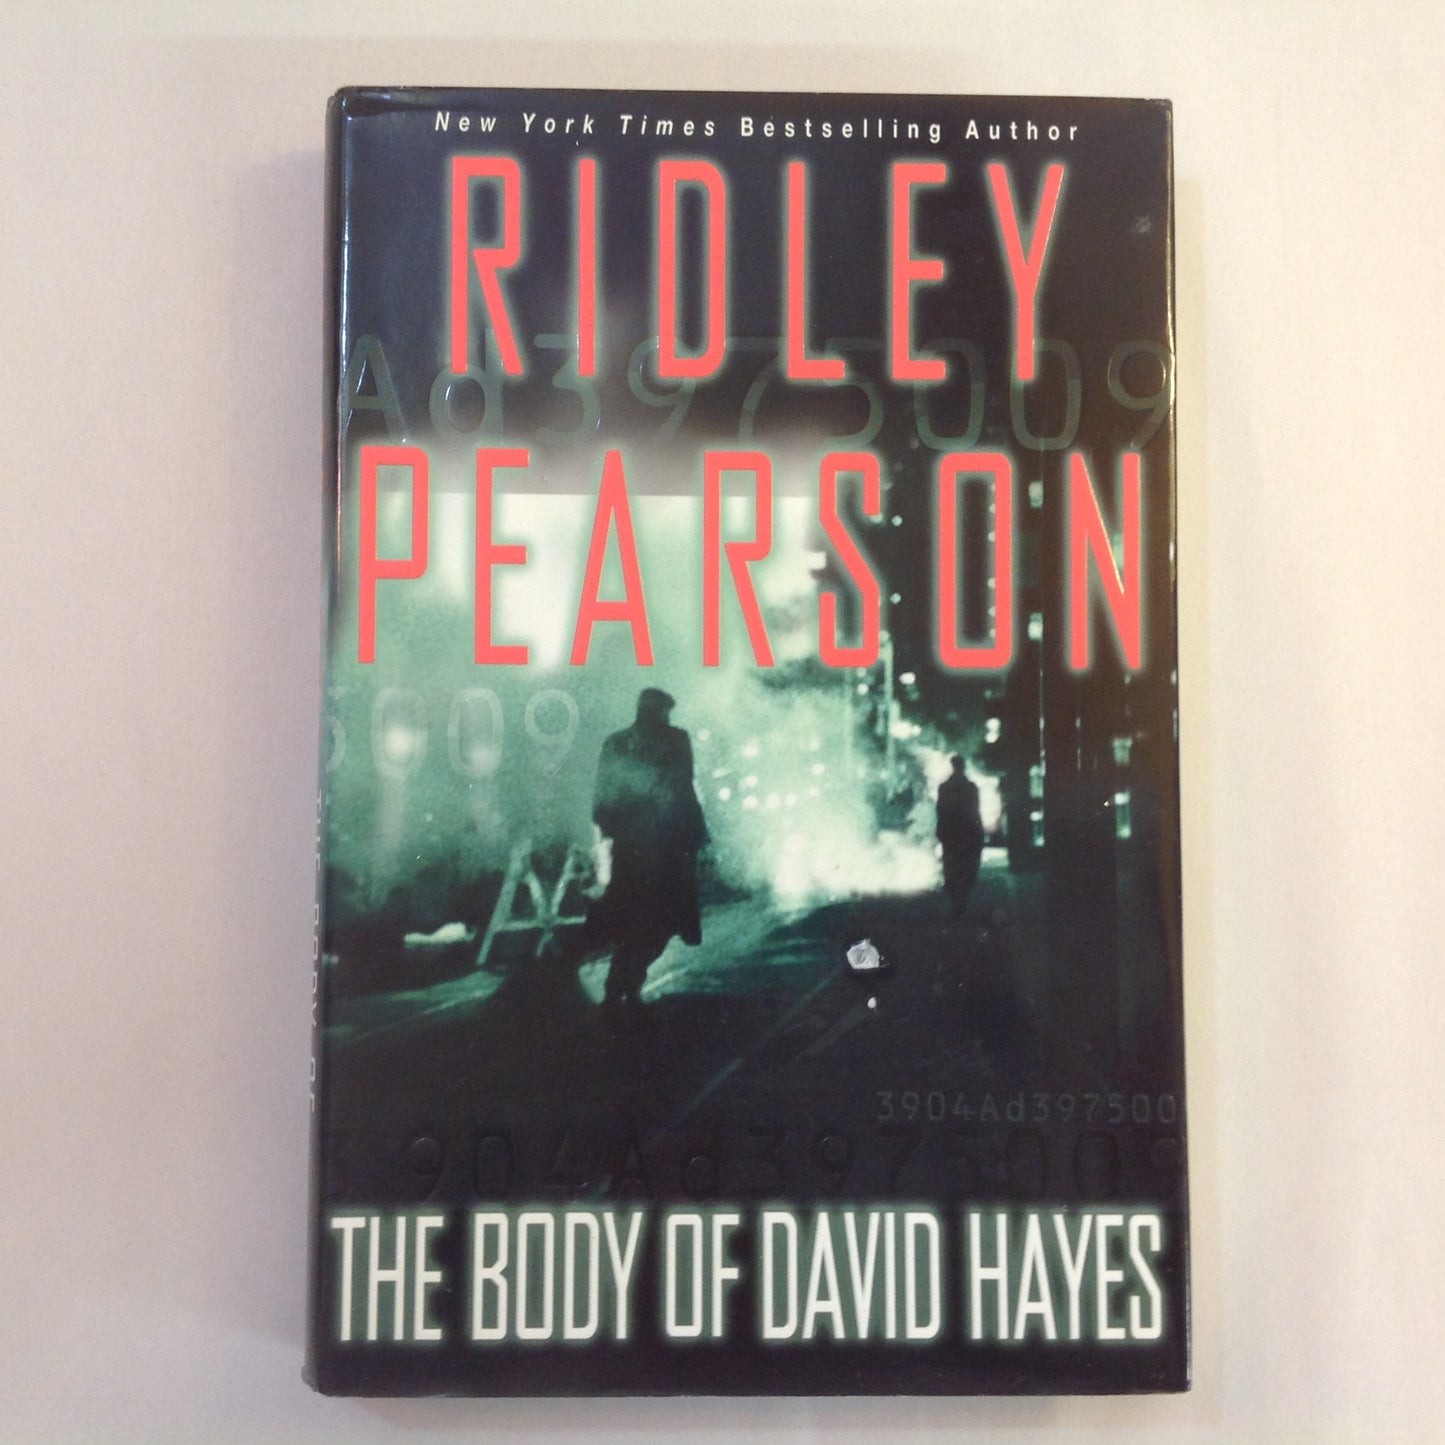 Vintage 2004 Hardcover The Body of David Hayes Ridley Pearson First Edition